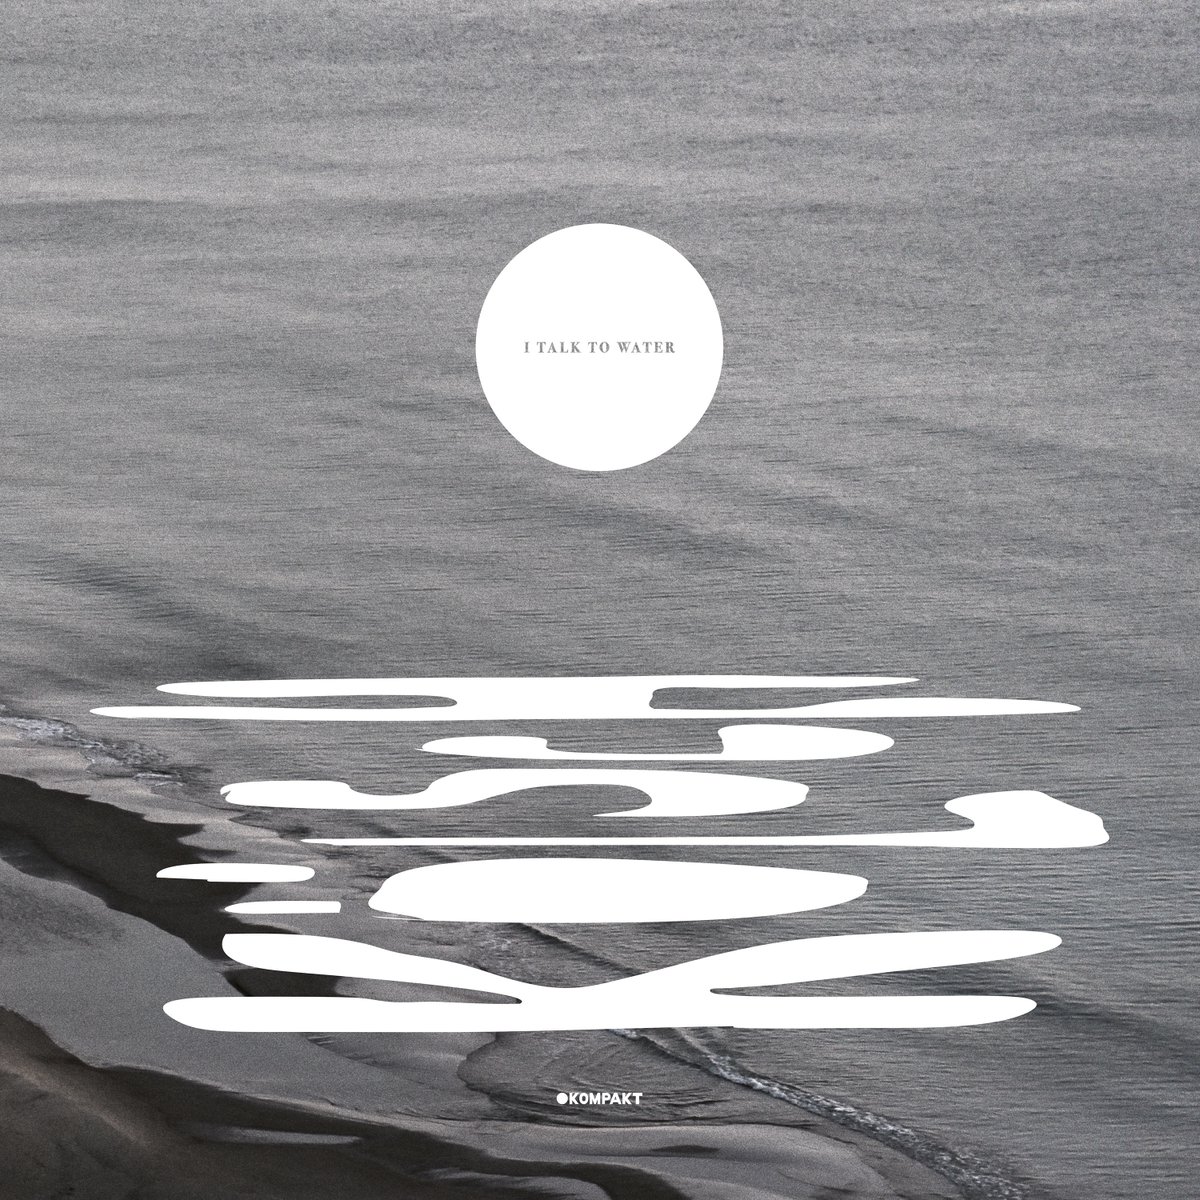 Out today: @kolschofficial - I Talk To Water (Kompakt 477) kompakt.fm/releases/i_tal…